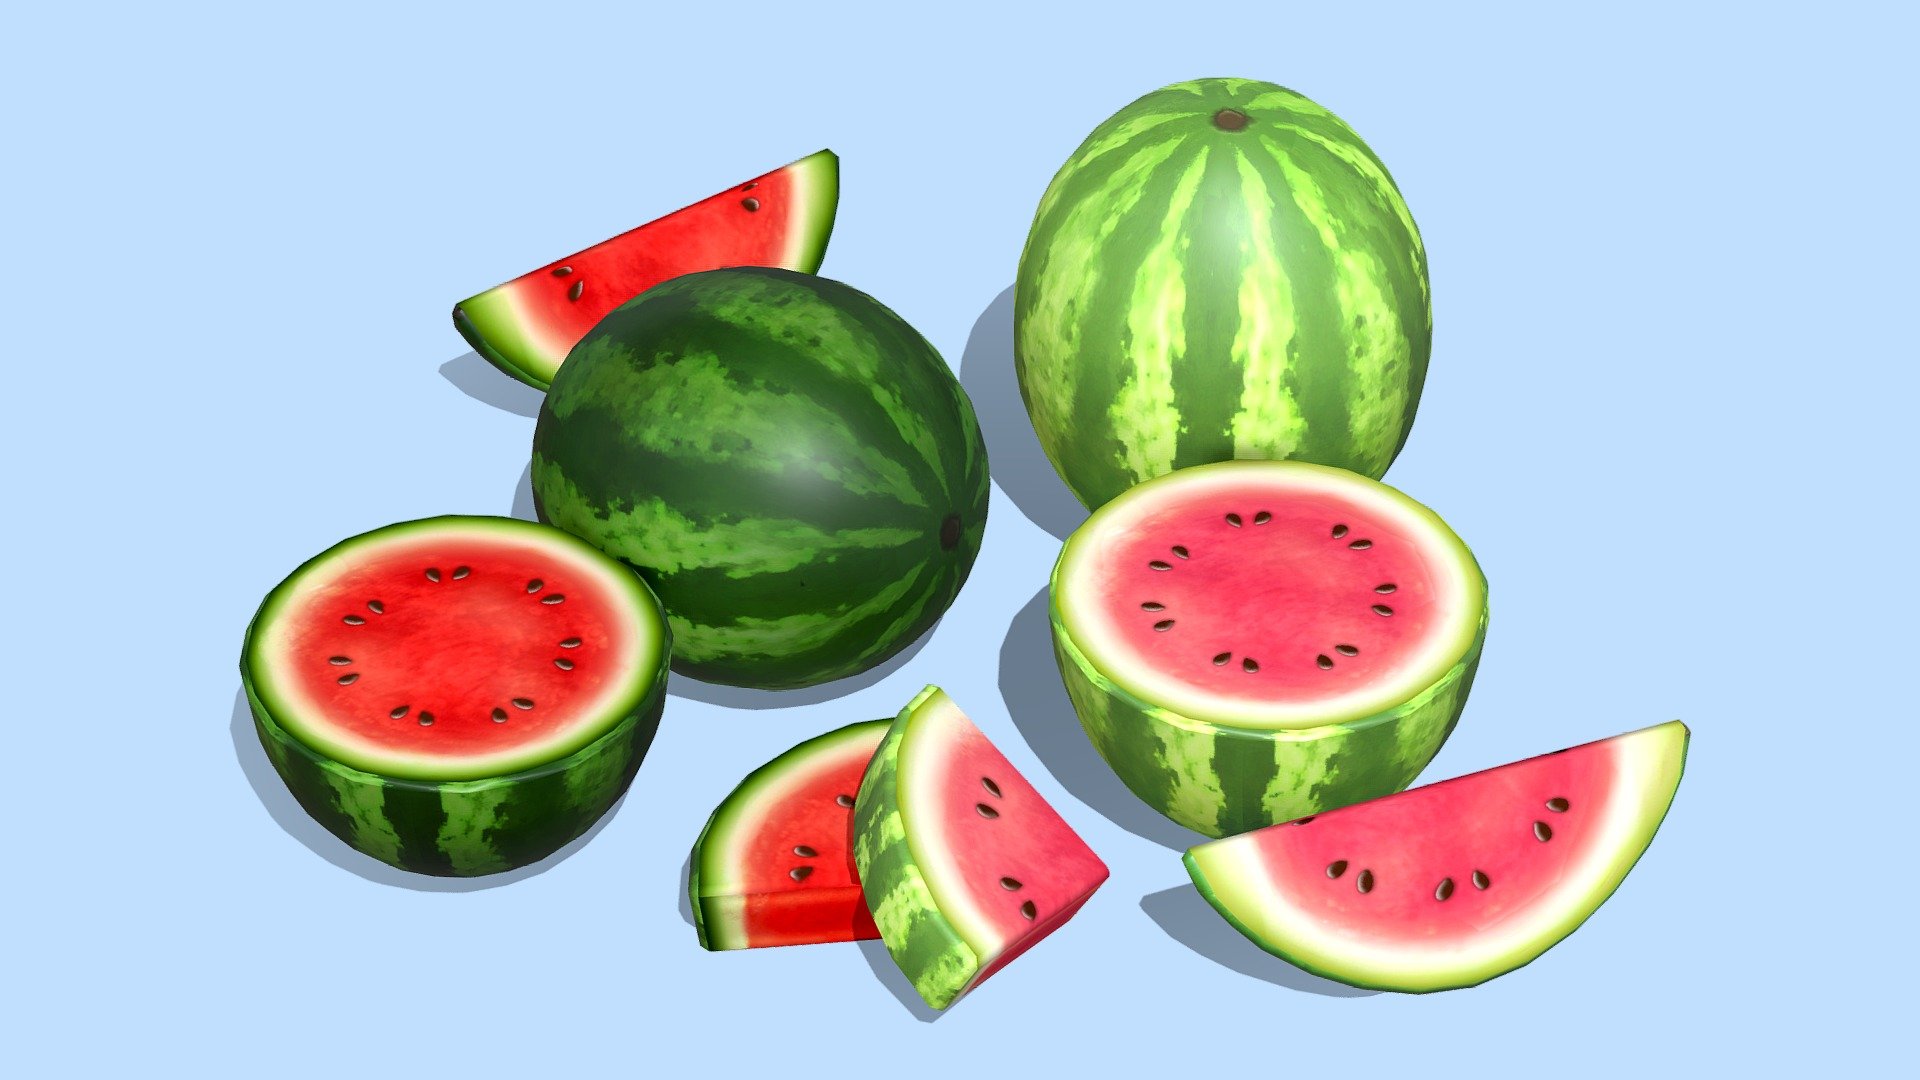 The best part of summer!




Two different kinds of watermelon with their cut and sliced versions

1024x1024 diffuse textures - can be lit or unlit

Low-poly models and handpainted textures
 - Watermelons - Buy Royalty Free 3D model by Megan Alcock (@citystreetlight) 3d model